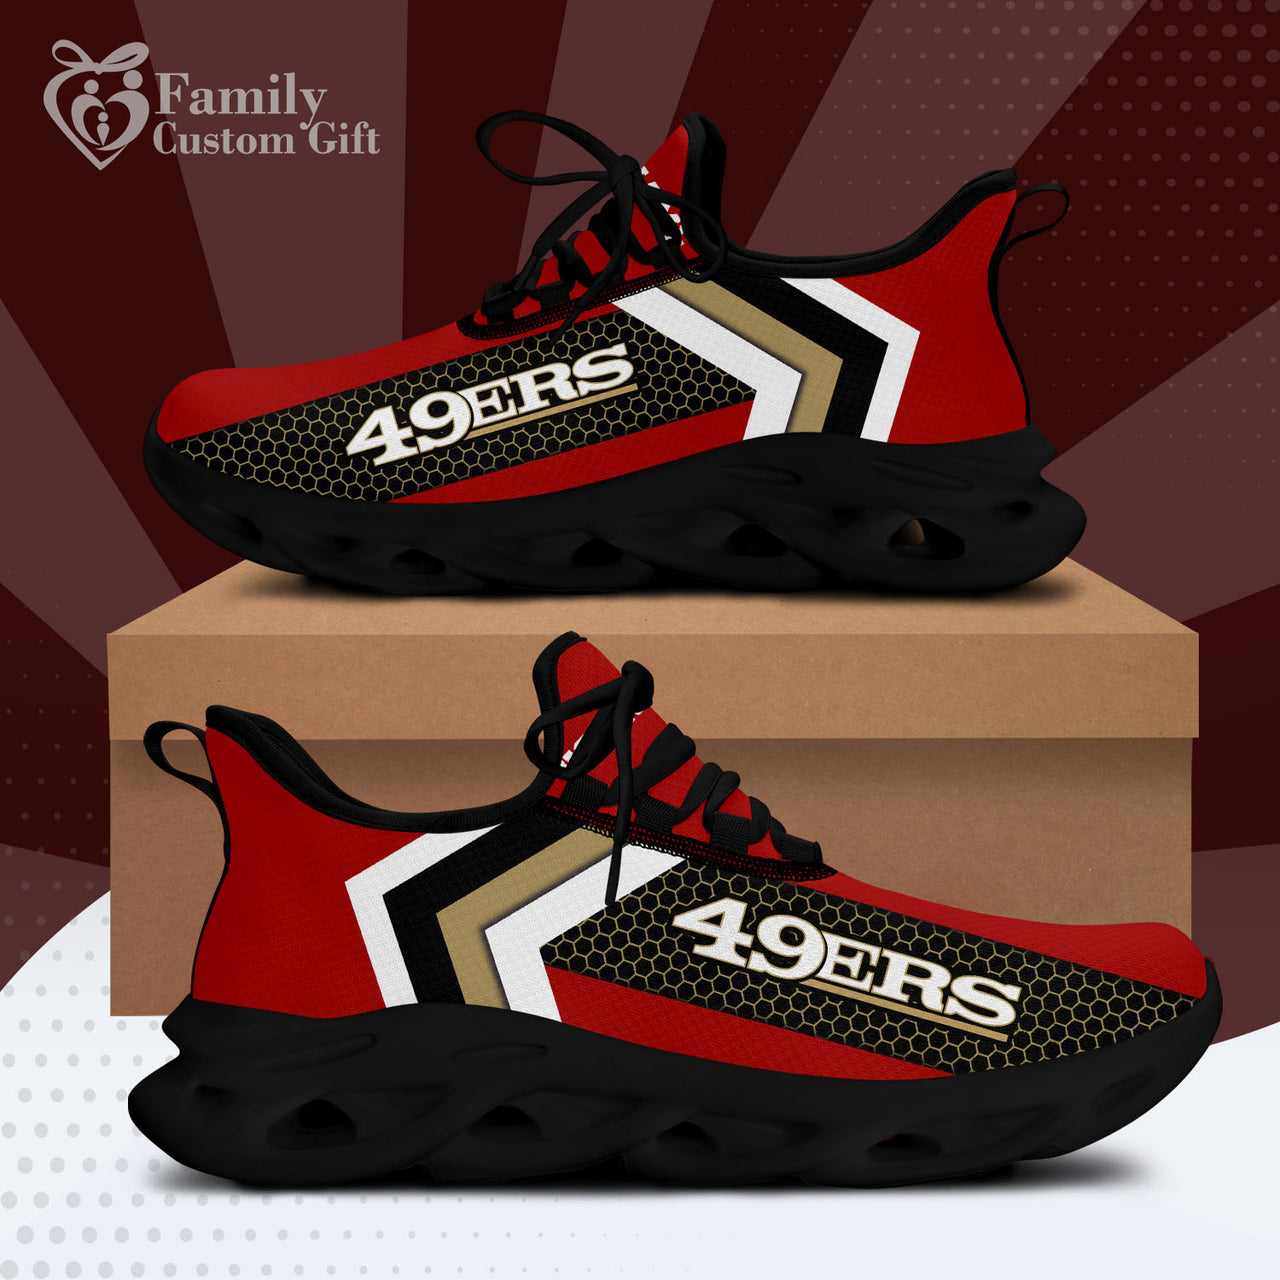 San Francisco Football 49ers Personalized Max Soul Sneakers Running Sport Shoes for Men Women